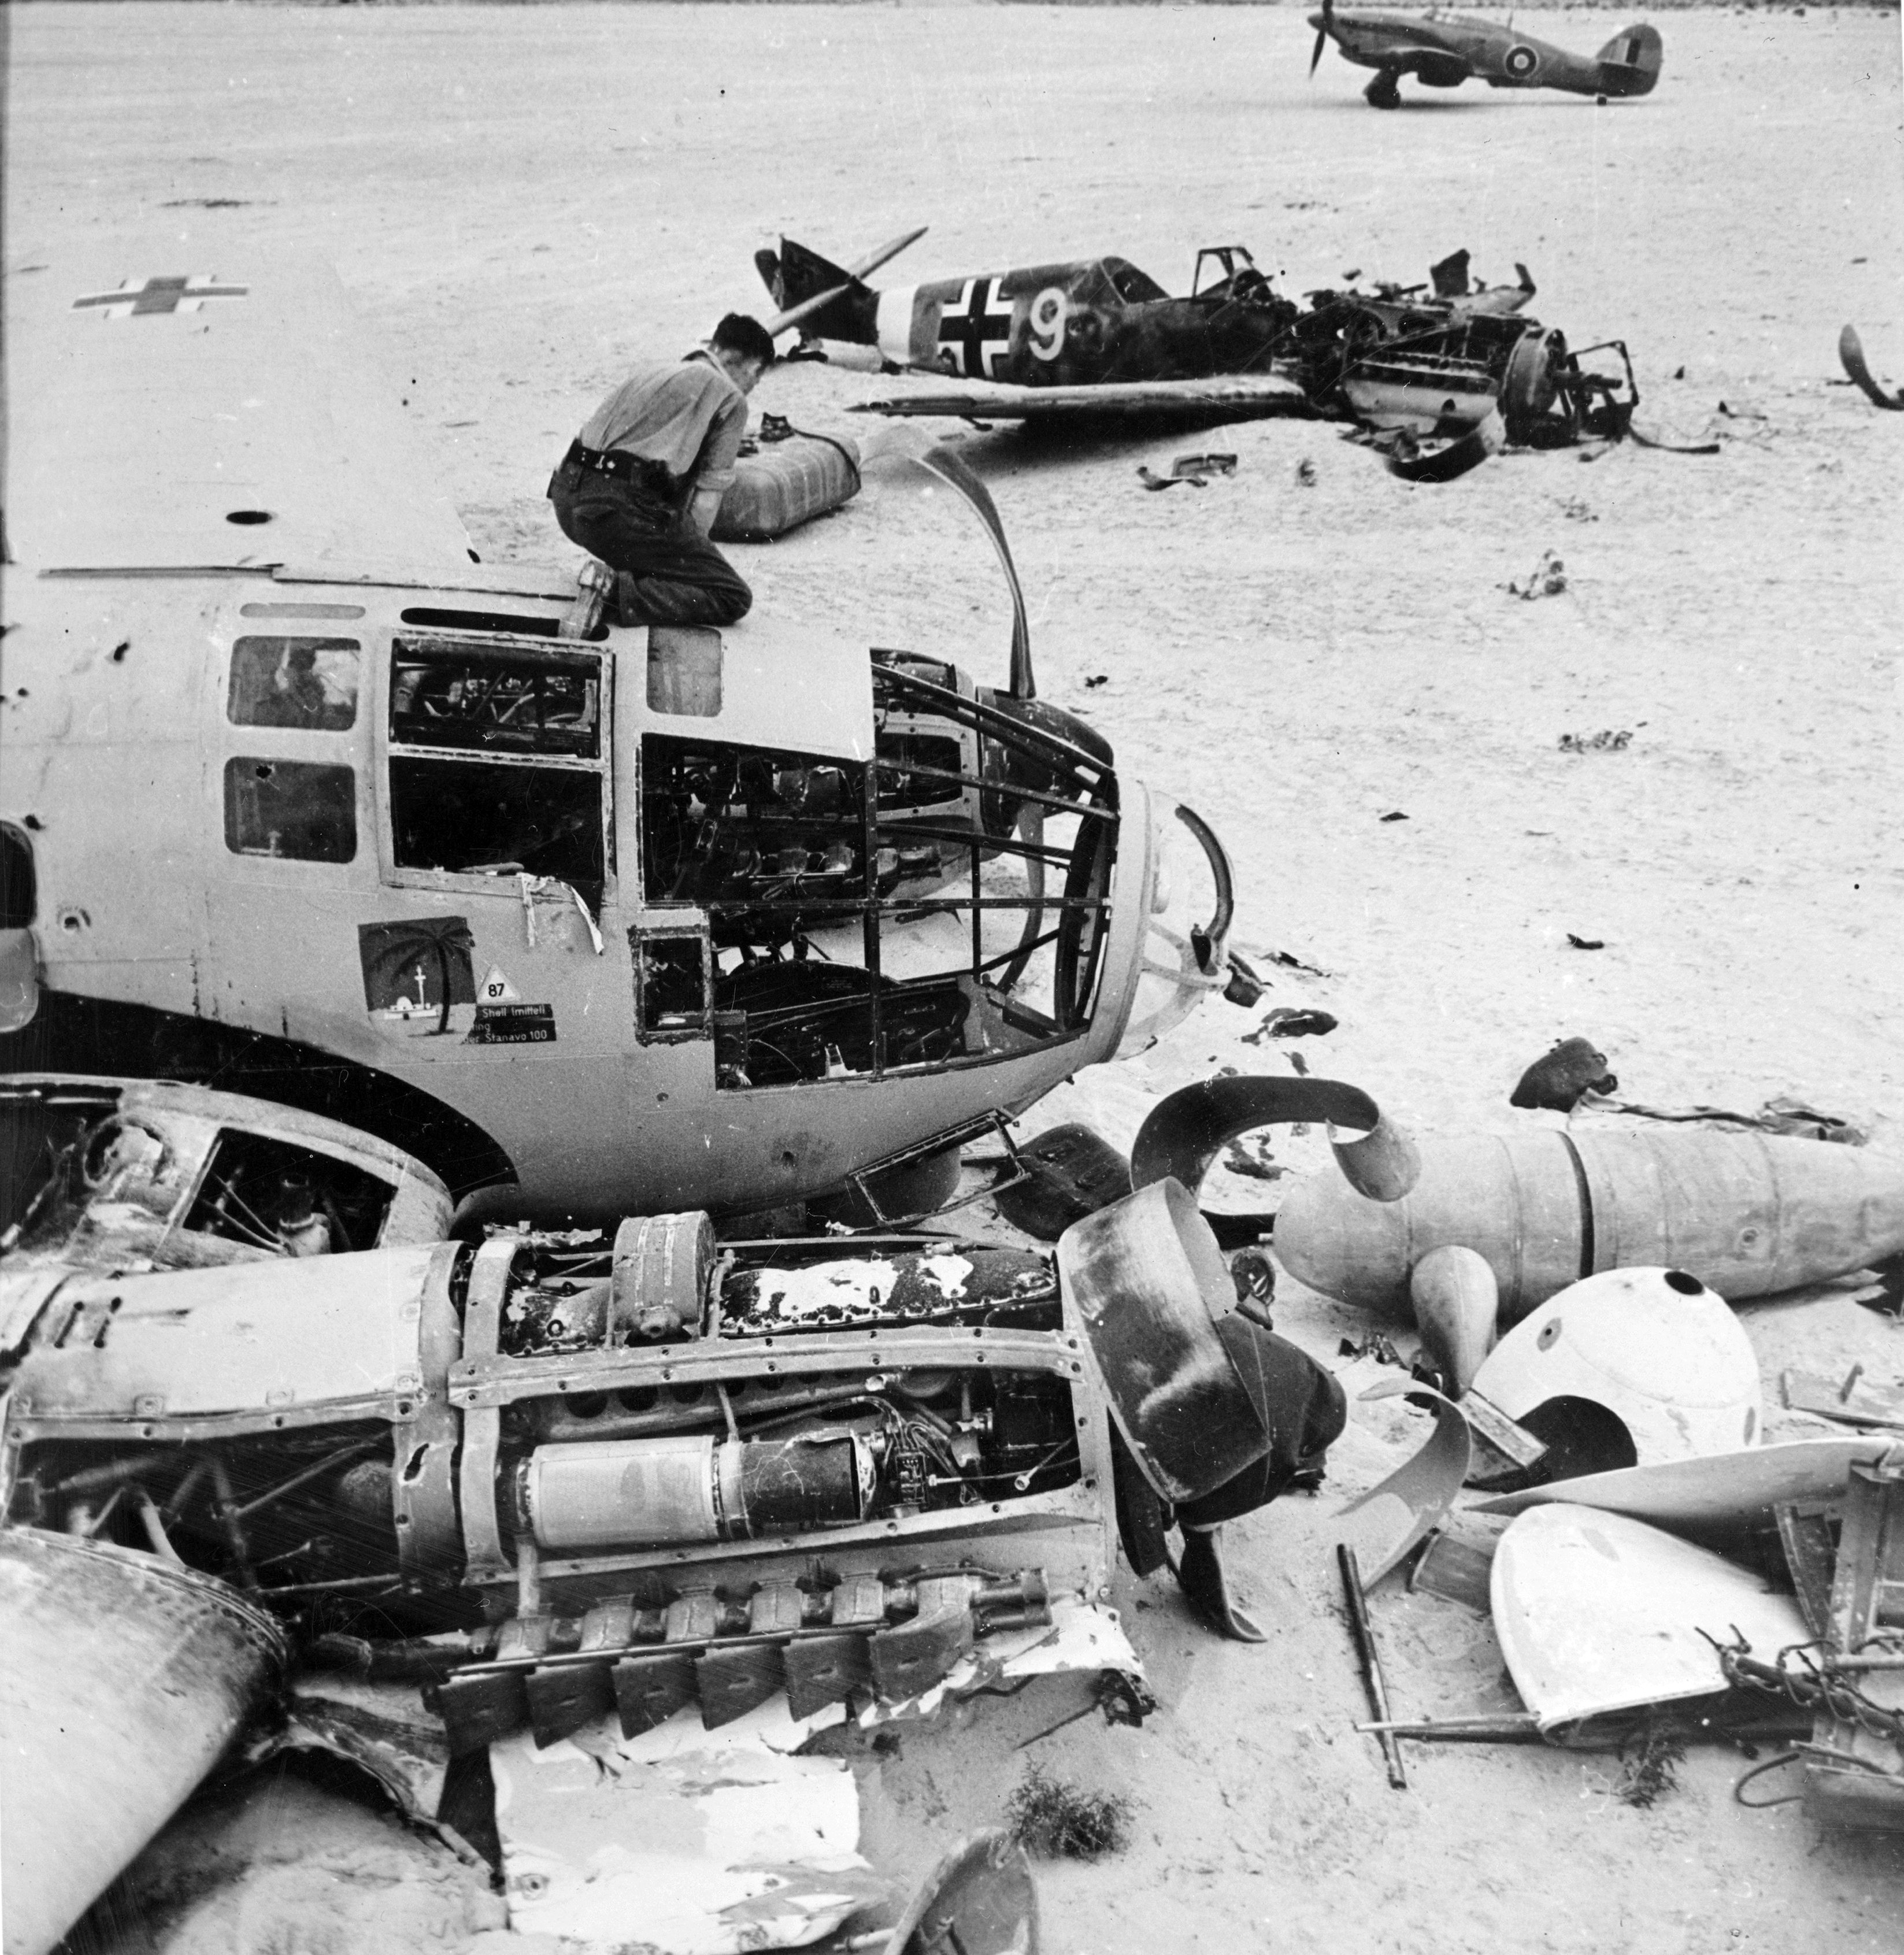 Allied ground crew disassembling a wrecked German He 111 aircraft near Daba and Fuka, Egypt, circa 1942; note wrecked Bf 109 fighter and Hurricane Mk II fighter in background